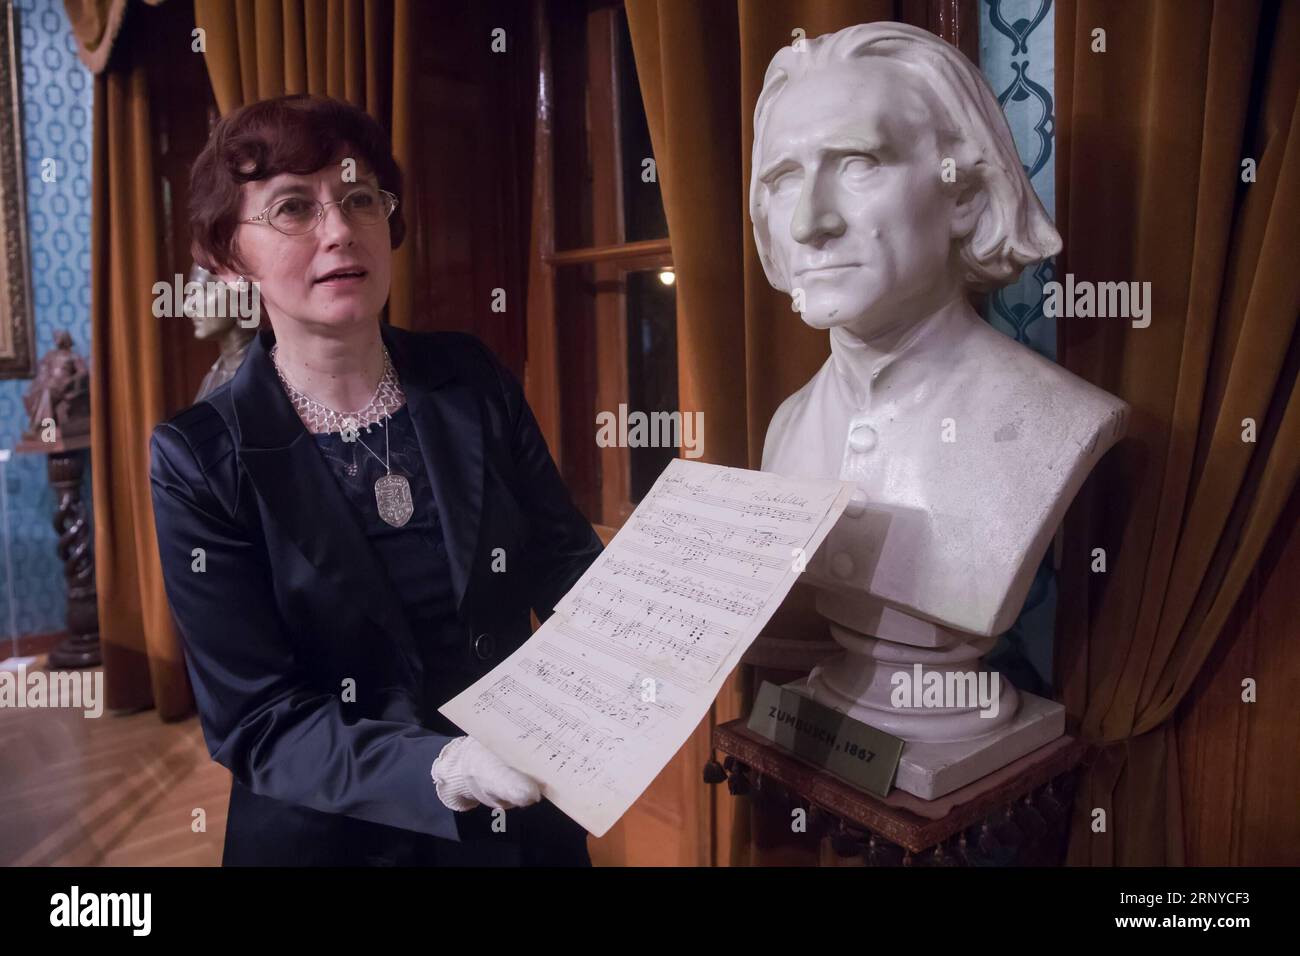 Bilder des Tages (180311) -- BUDAPEST, March 11, 2018 -- Zsuzsanna Domokos,director of the Franz Liszt Memorial Museum and Research Center, holds famous Hungarian composer Franz Liszt s manuscript which is previously thought lost in the museum in Budapest, Hungary, on March 10, 2018. The manuscripts believed to be of famous Hungarian composer Franz Liszt were presented in the museum on Saturday in a solemn ceremony. )(gj) HUNGARY-BUDAPEST-LISZT-MANUSCRIPTS AttilaxVolgyi PUBLICATIONxNOTxINxCHN Stock Photo